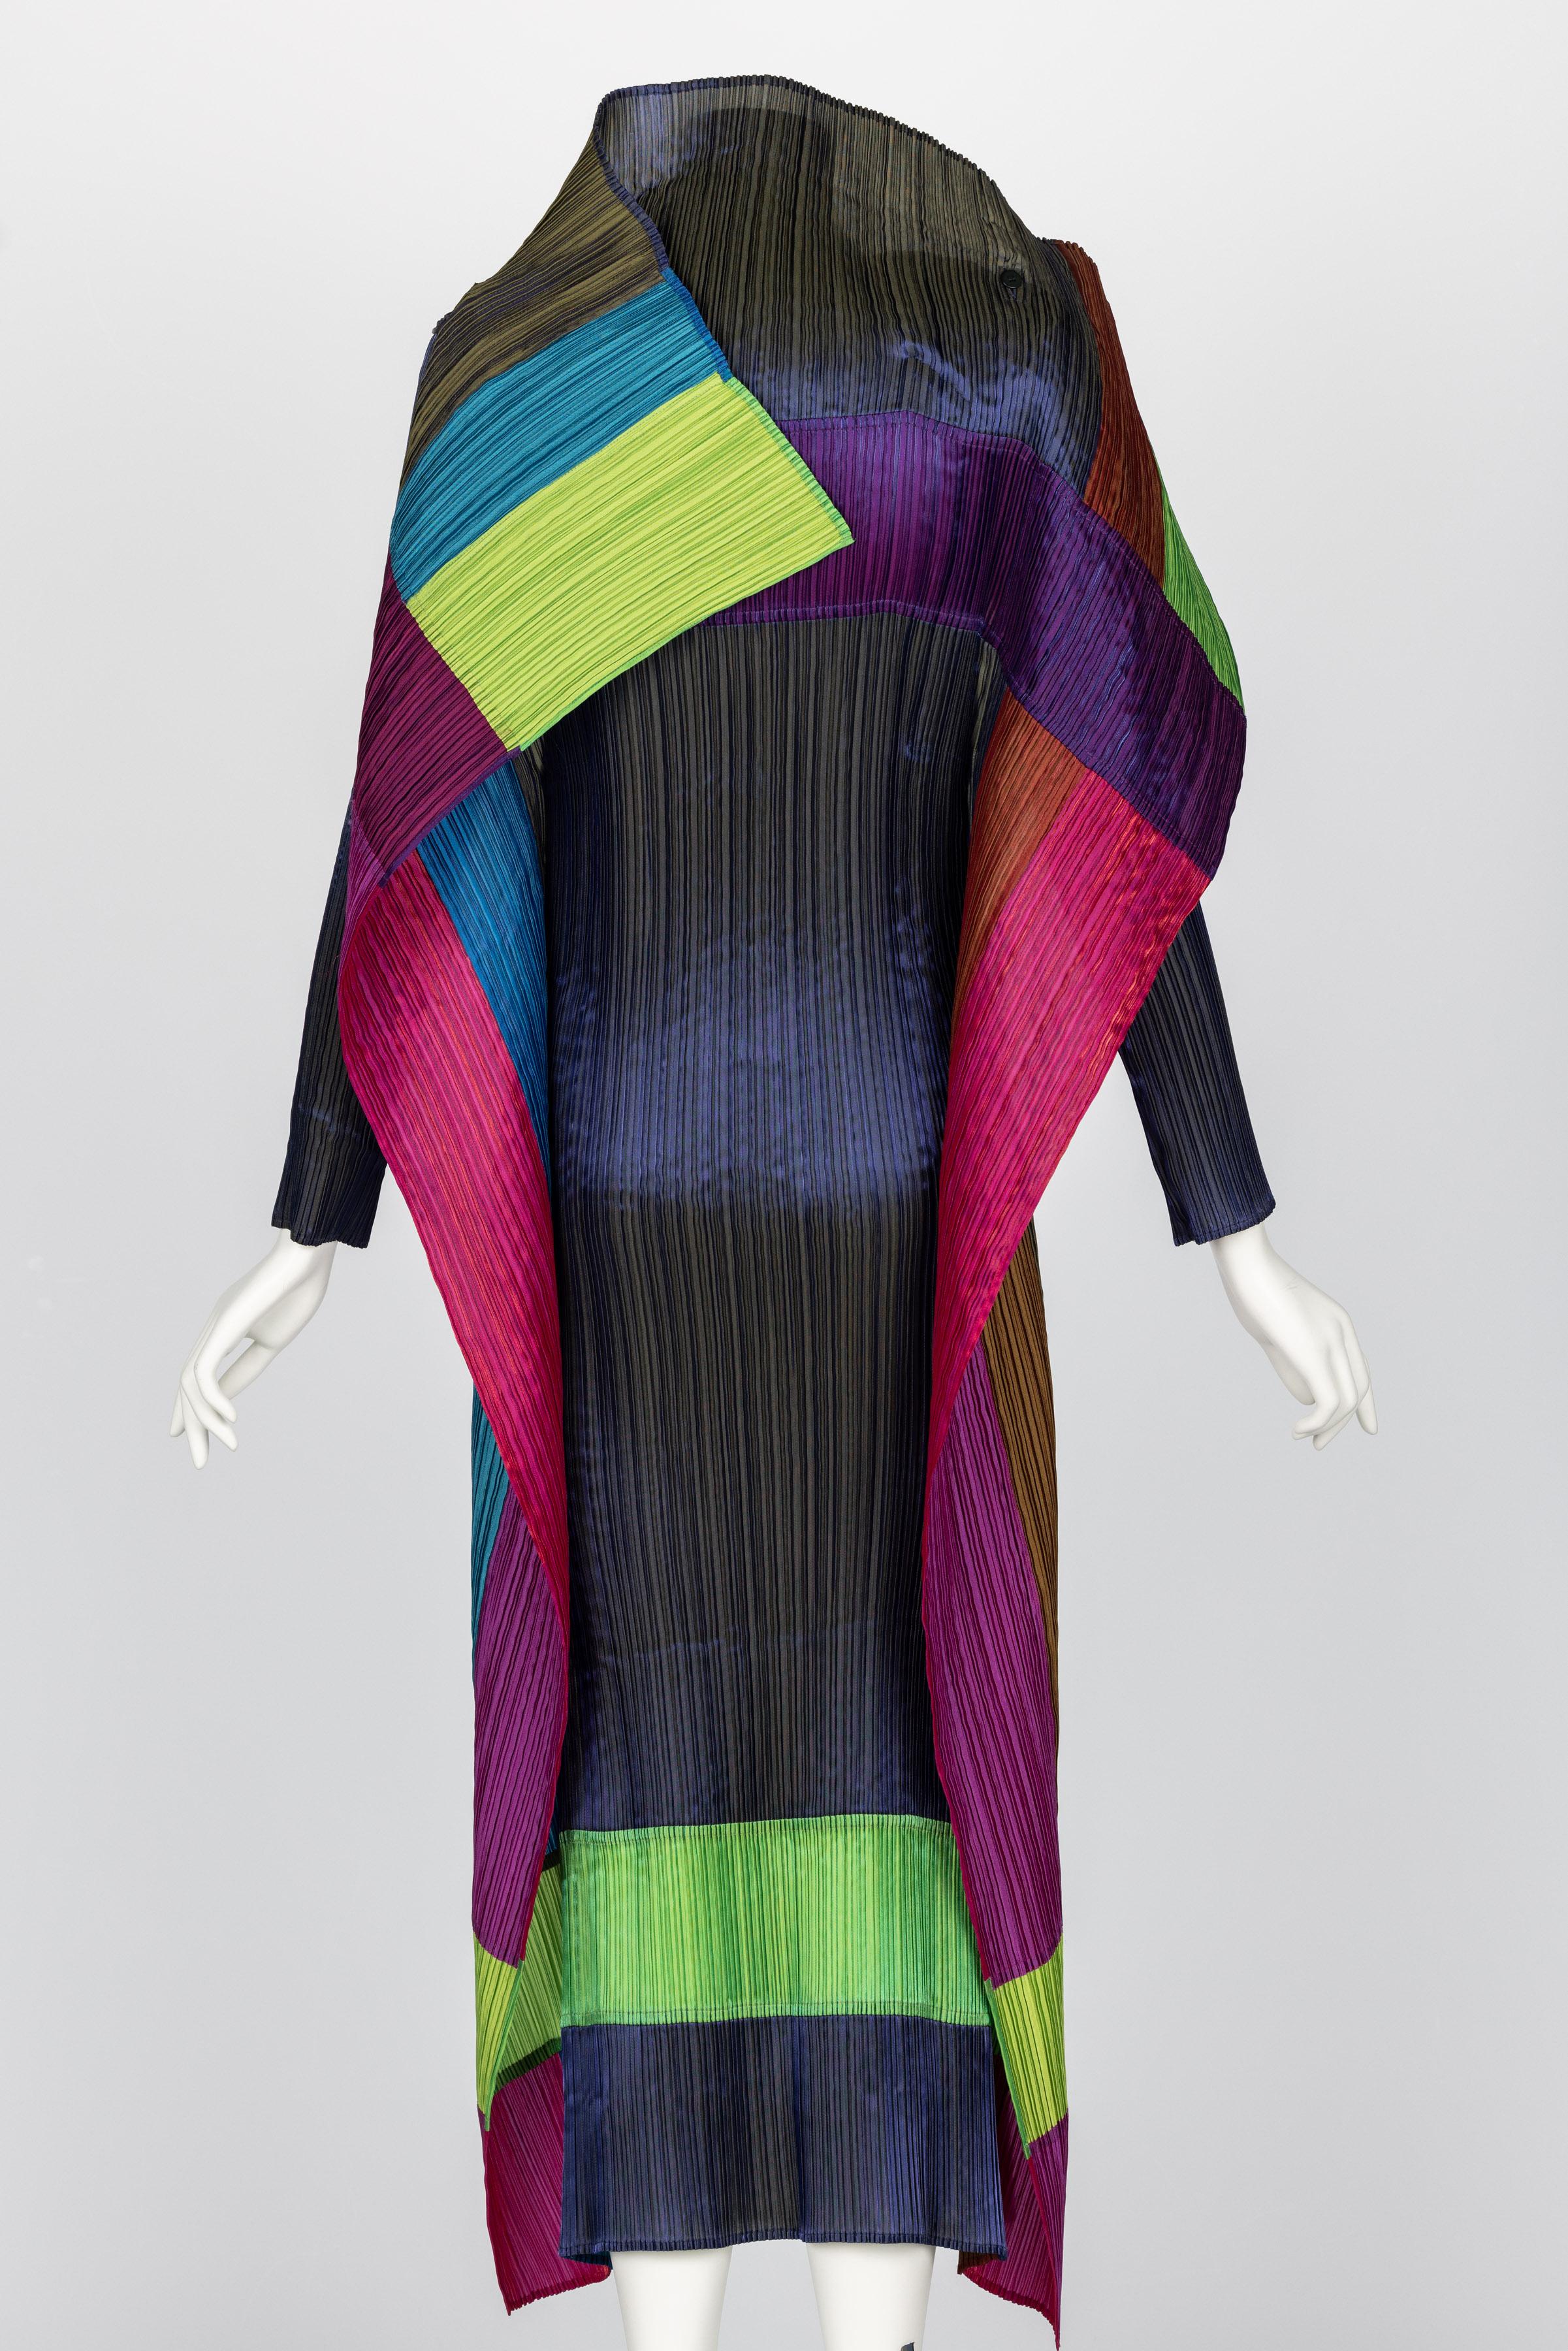 Incredible Rare Issey Miyake Pleats Please Avant Garde Color Block Dress For Sale 2